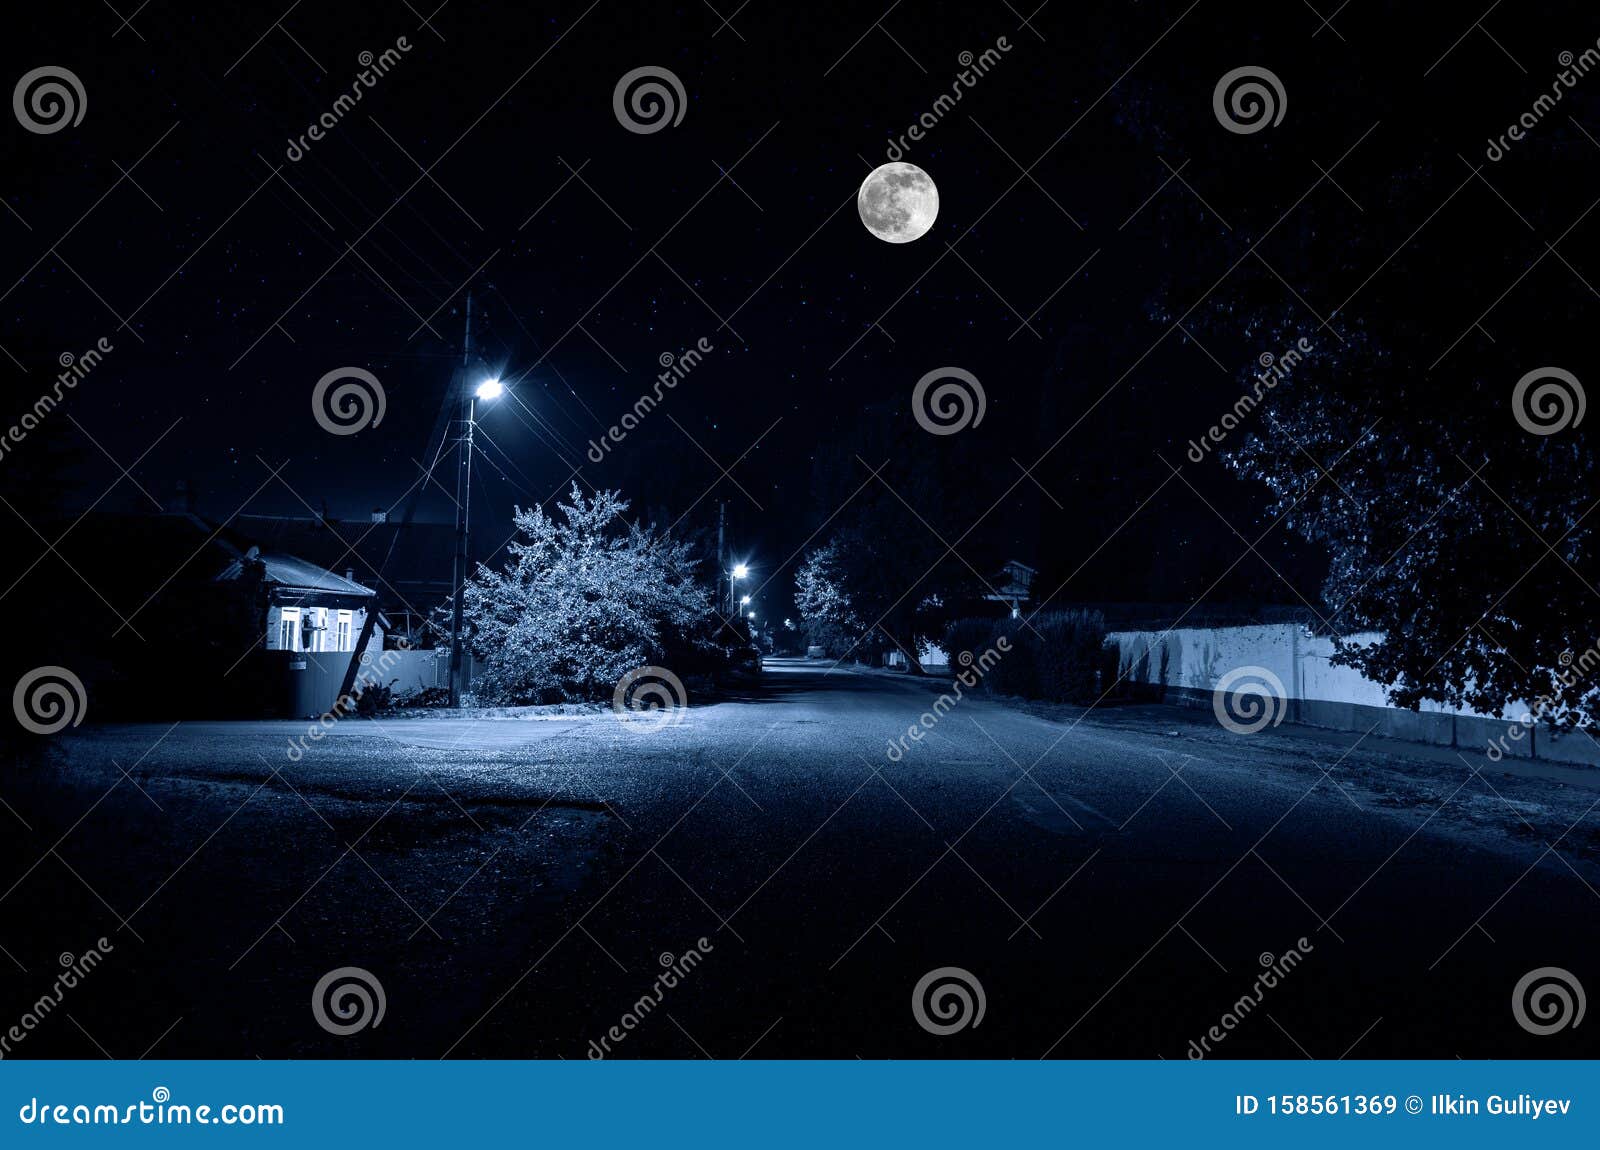 Full Moon Over Quite Village at Night. Beautiful Night Landscape ...